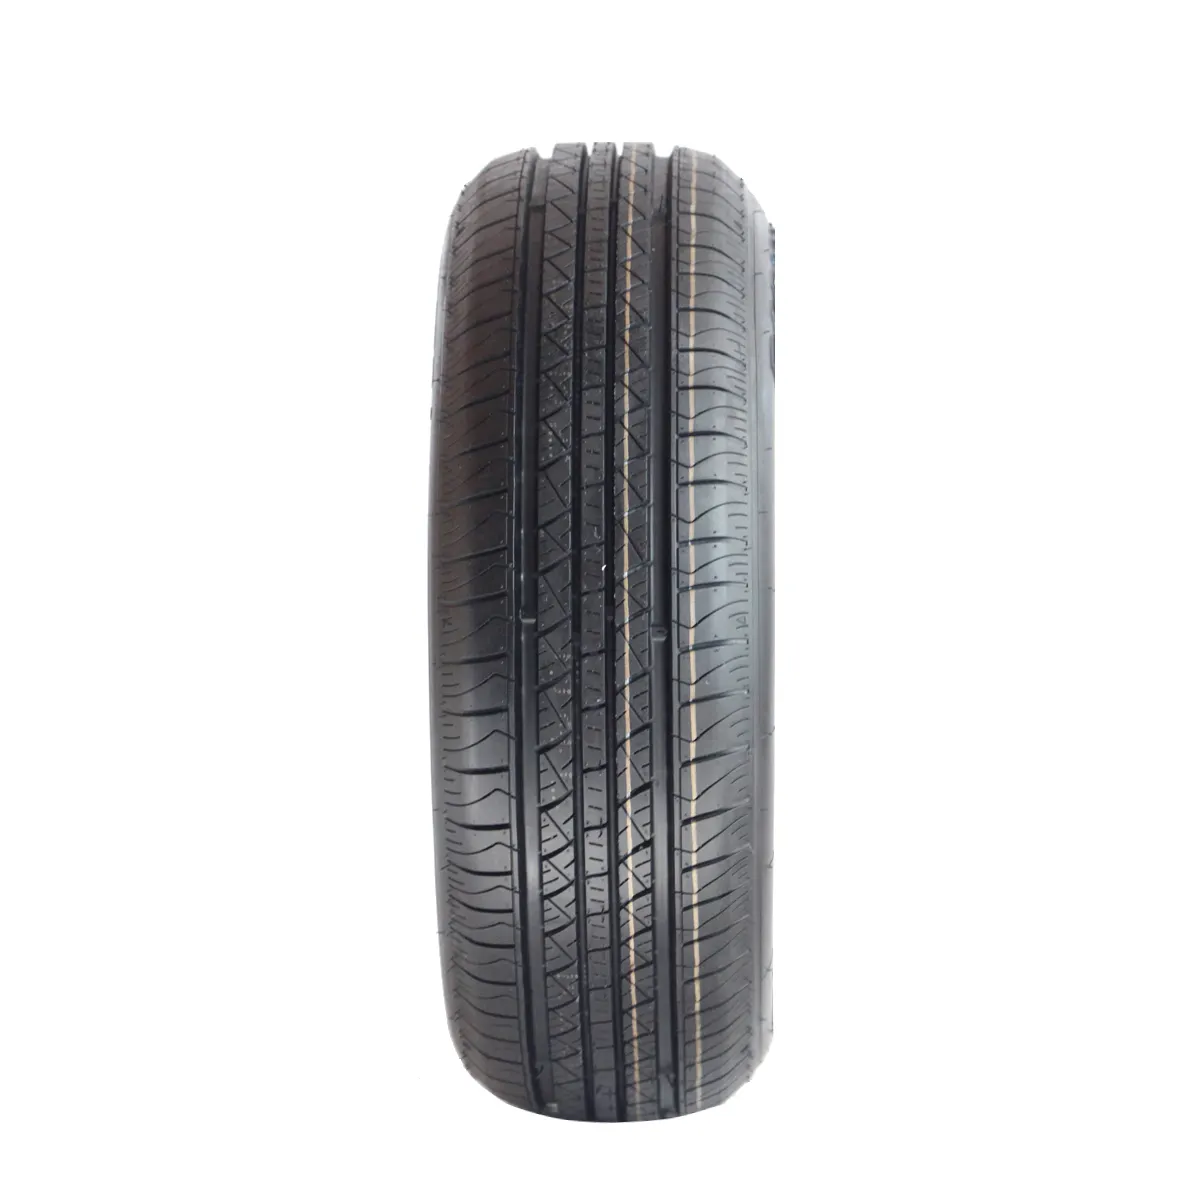 155r12 175/70r12 small sizes PCR Car tyres very cheap price